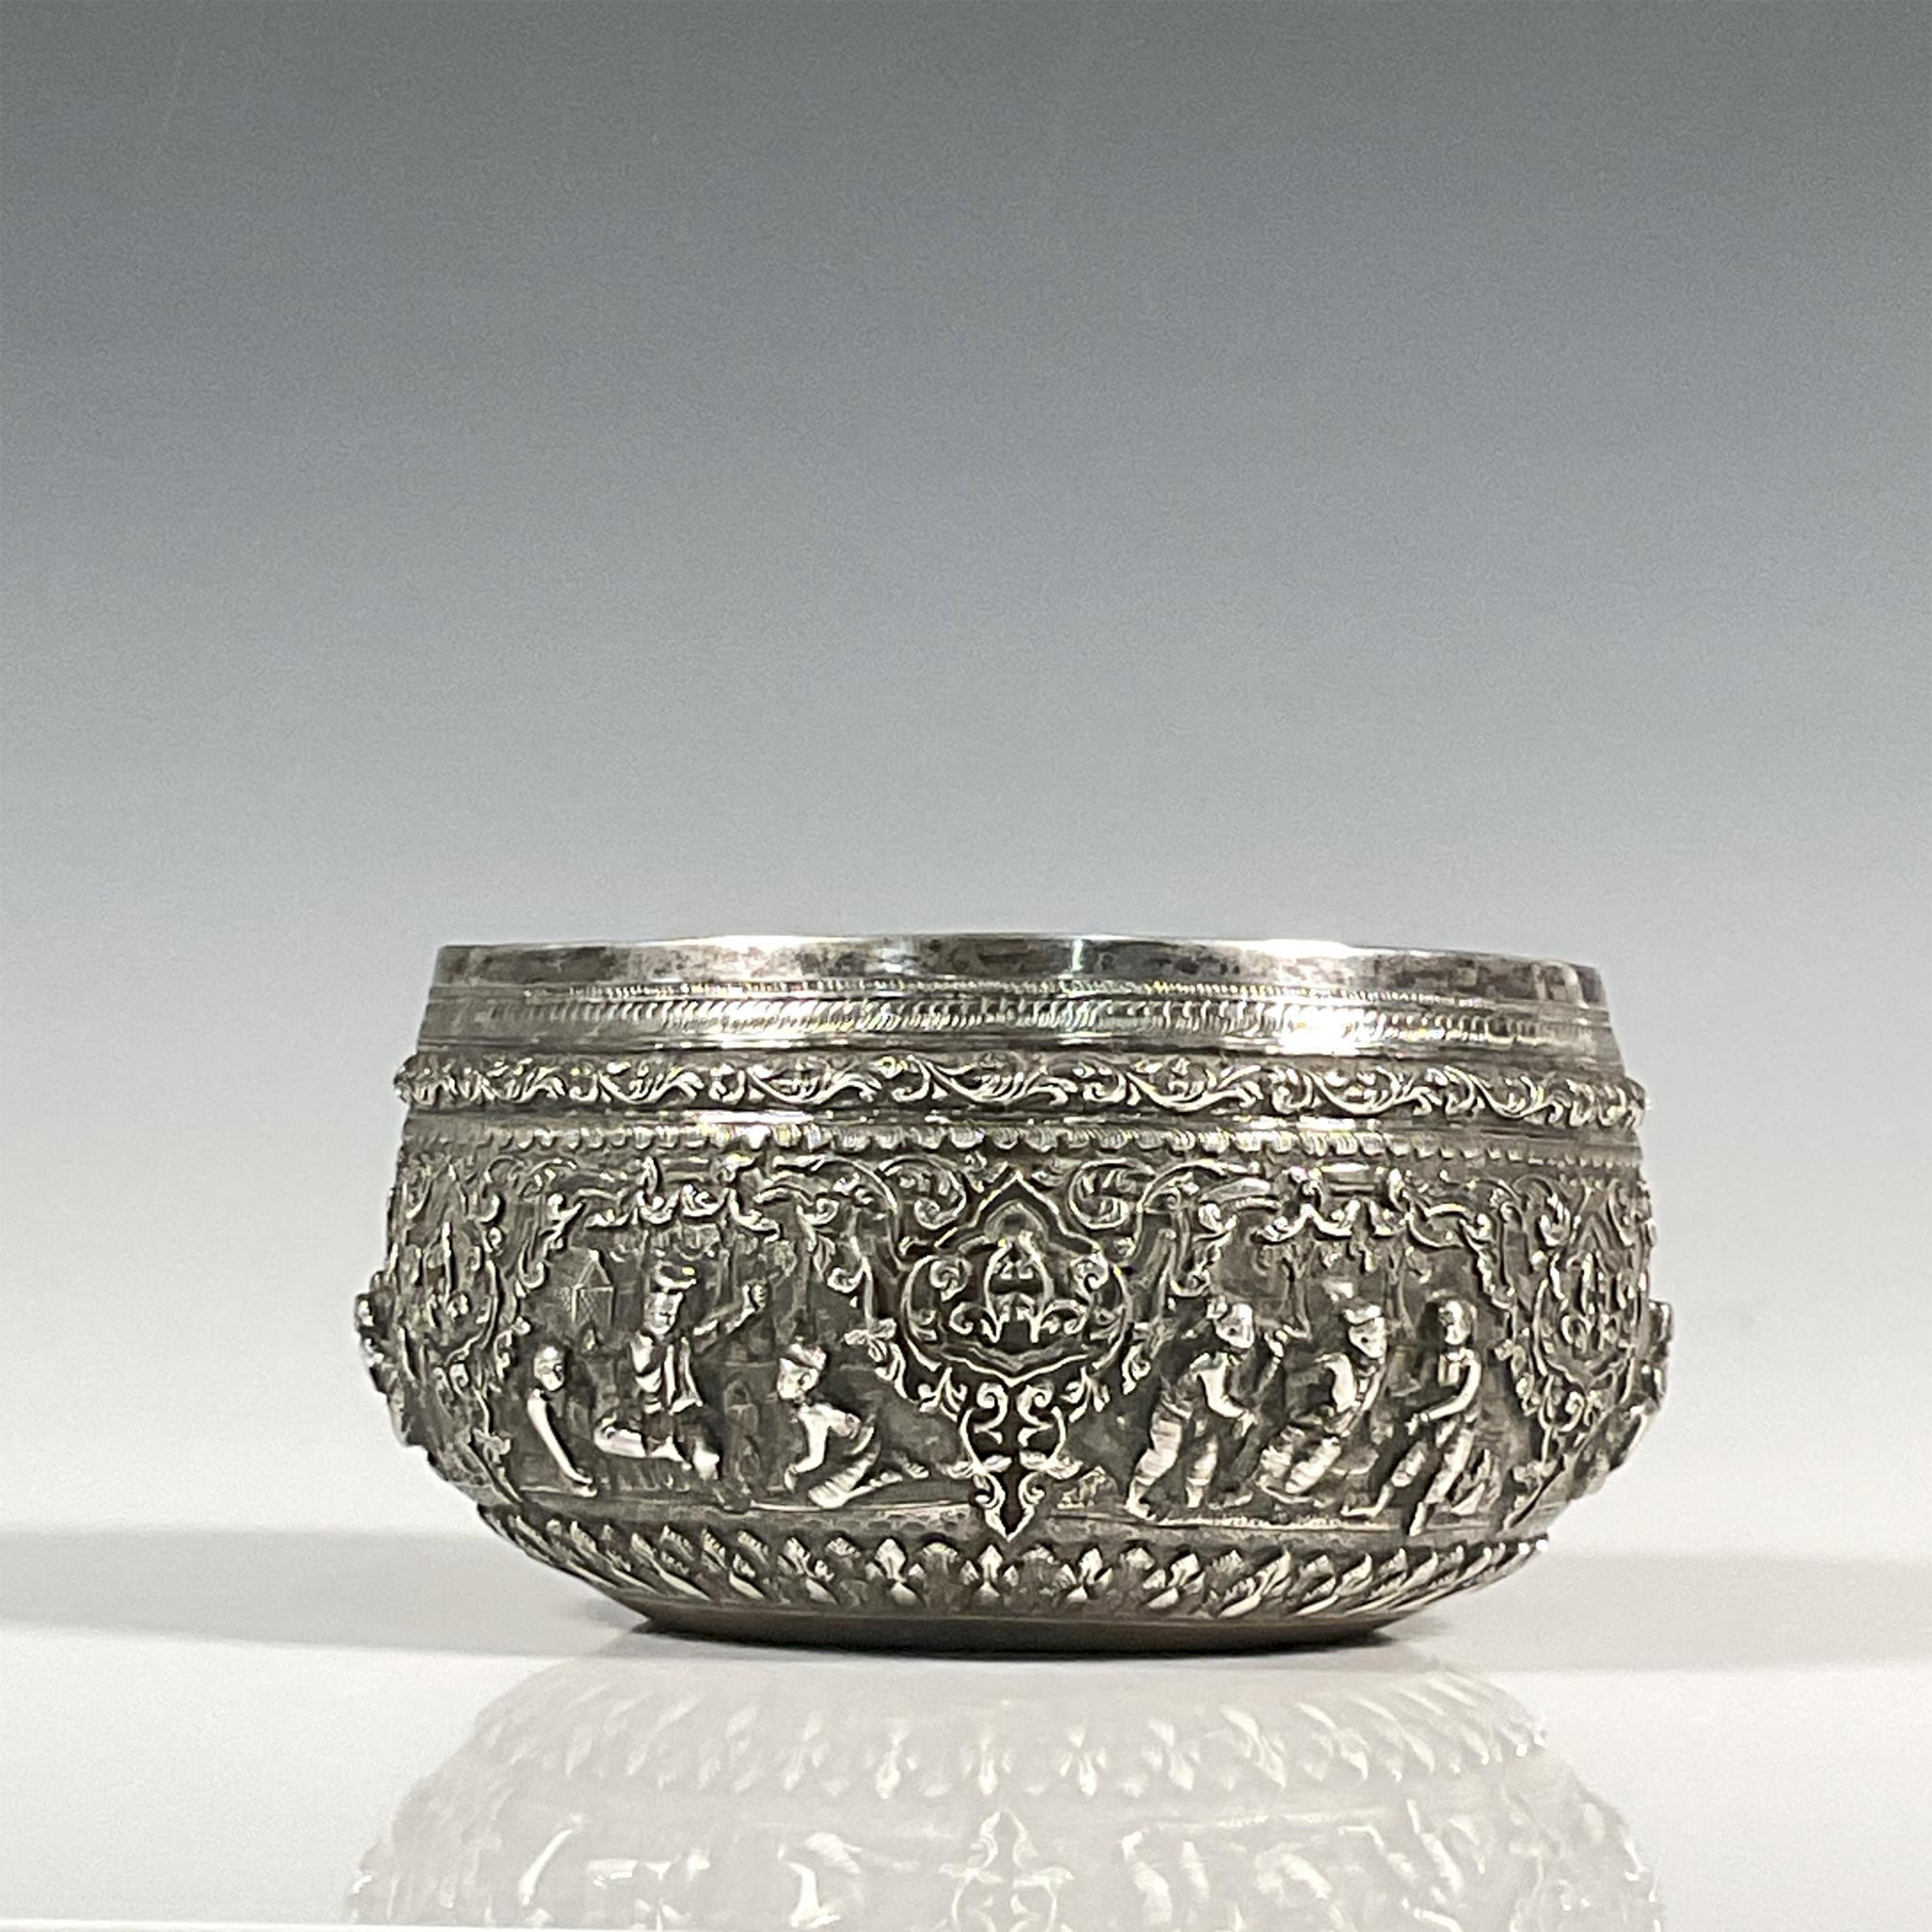 Coombes and Company Ltd. Burmese Silver Circular Bowl - Image 2 of 3